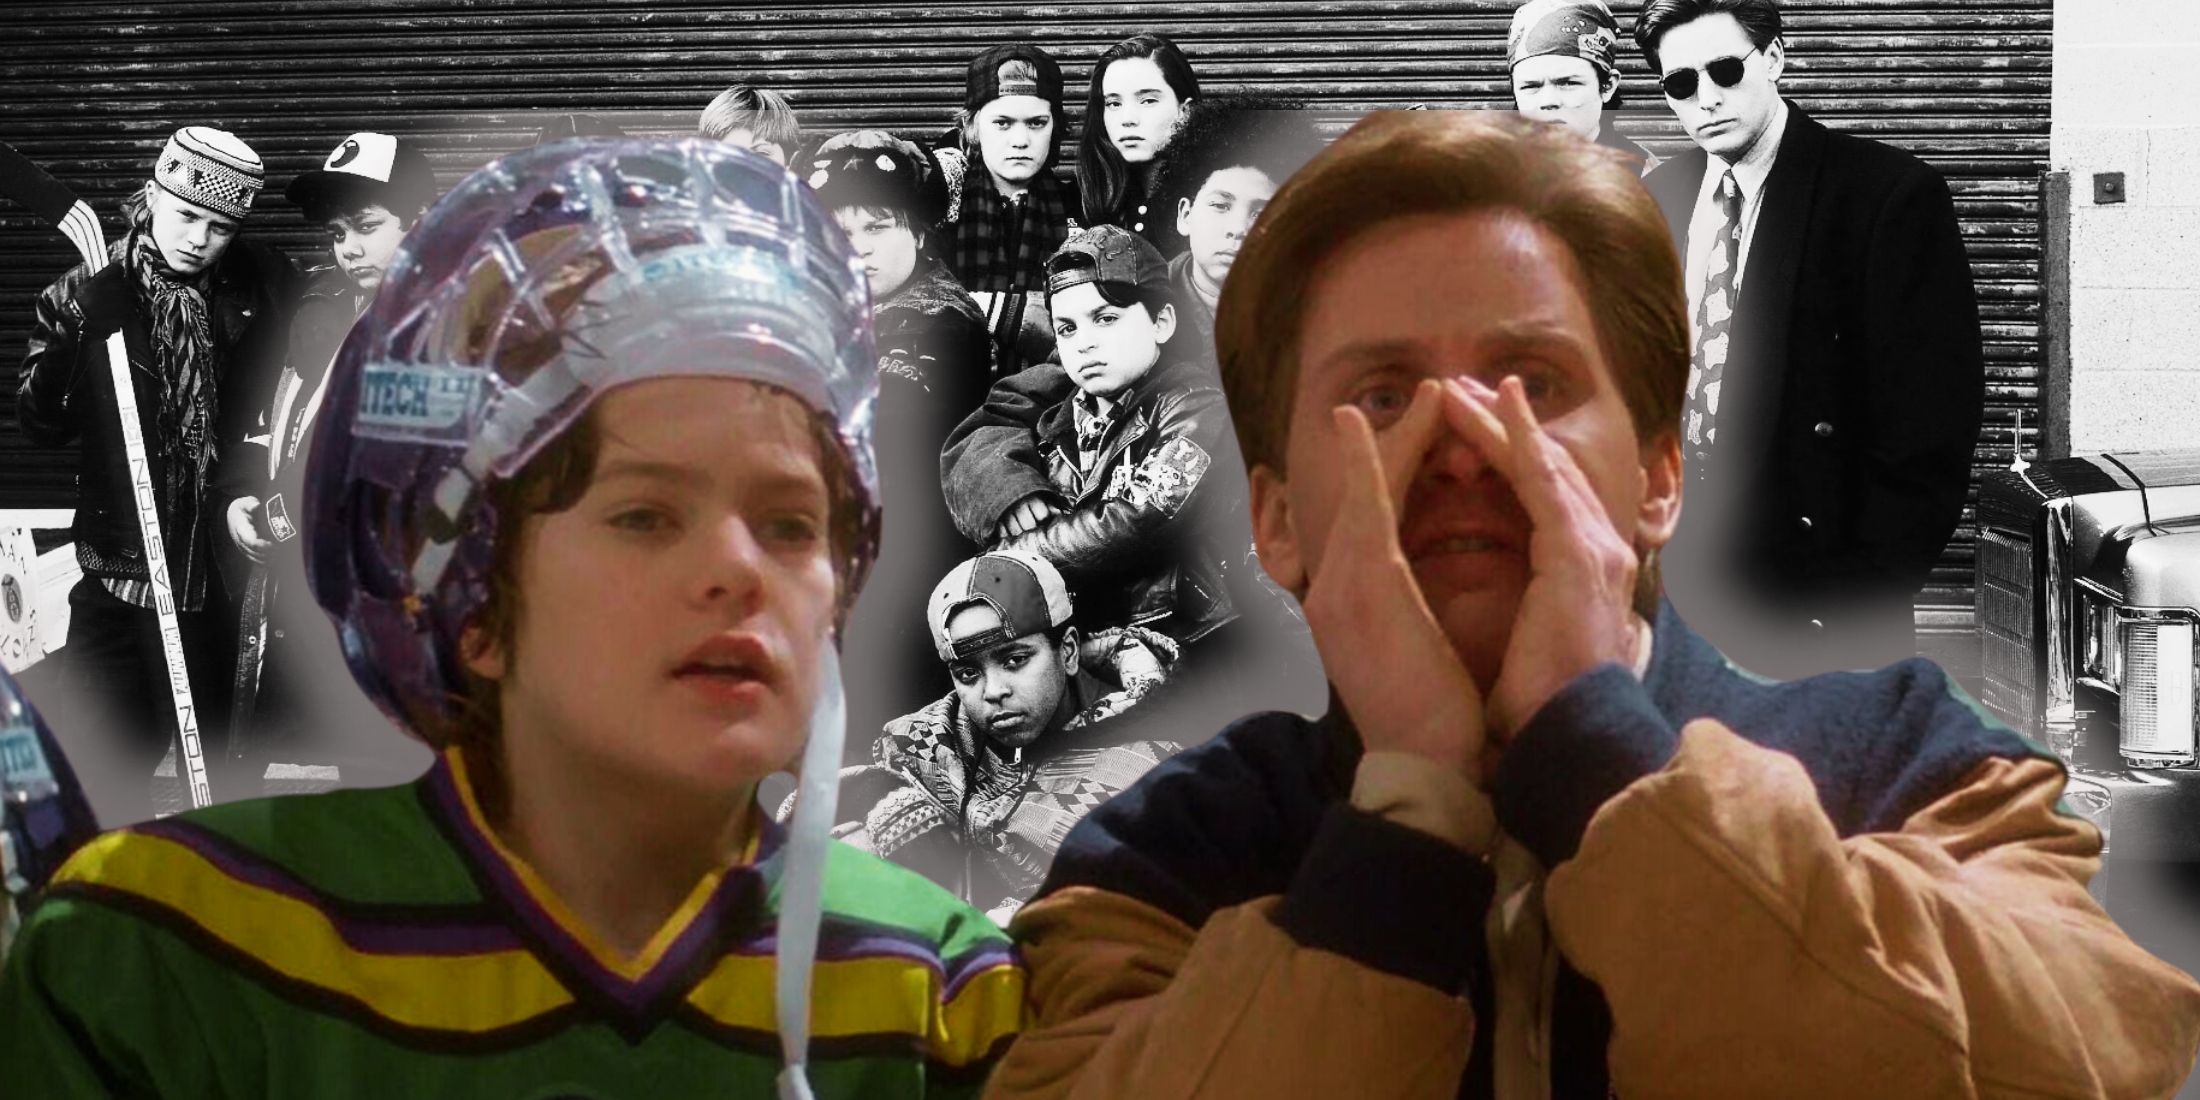 Mighty Ducks characters Charlie and Bombay talking to someone at a hockey game with the original team in black and white behind them